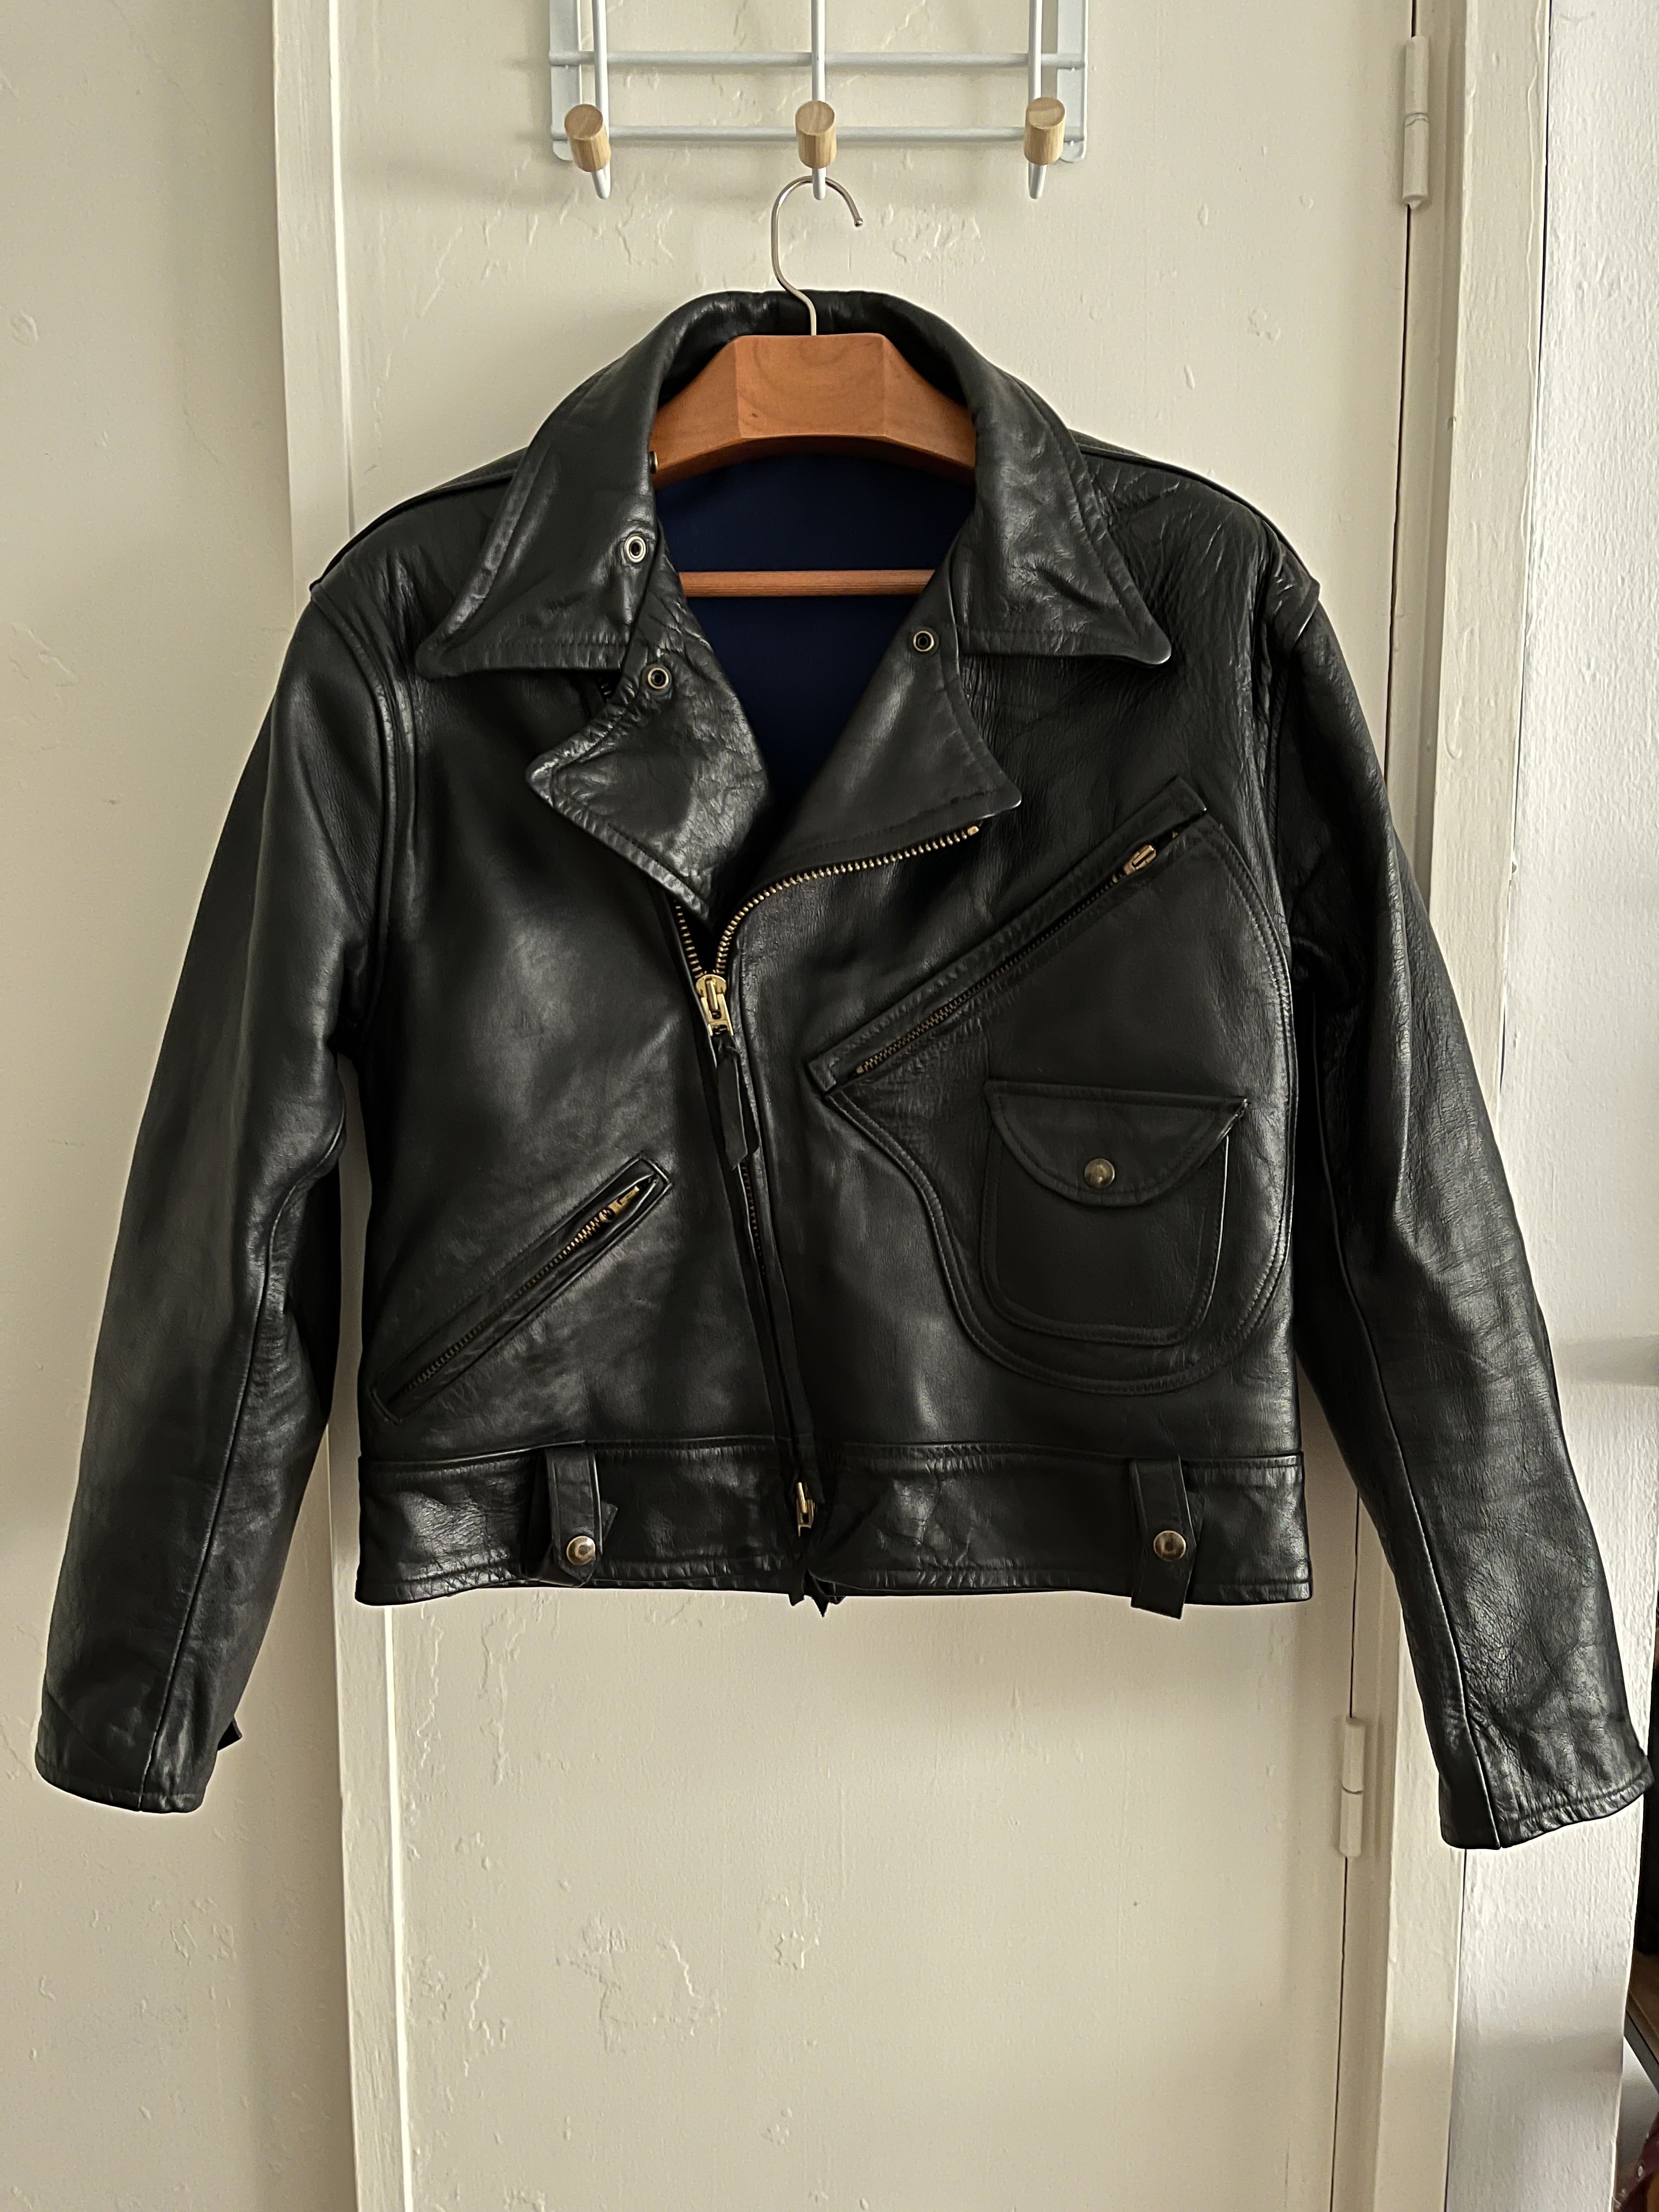 Resale value for my (destroyed) Double Helix Deviant jacket | The ...